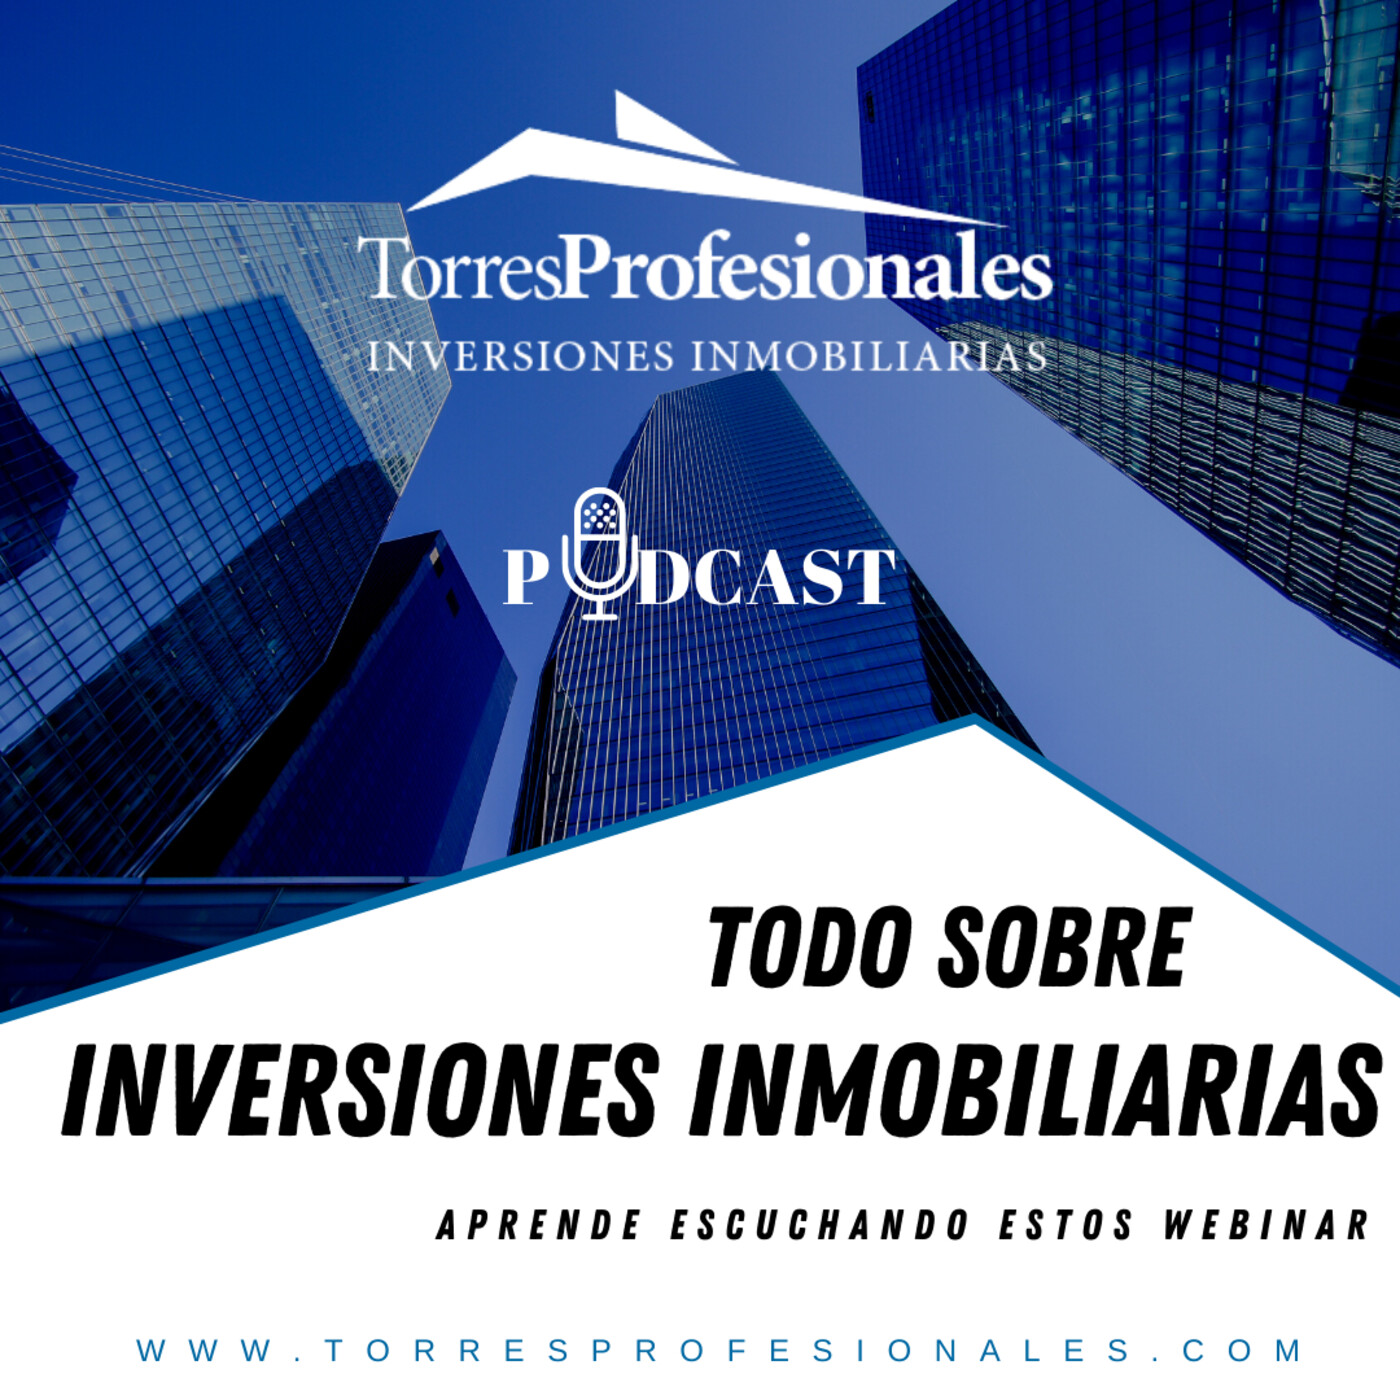 Torres Profesionales Podcast